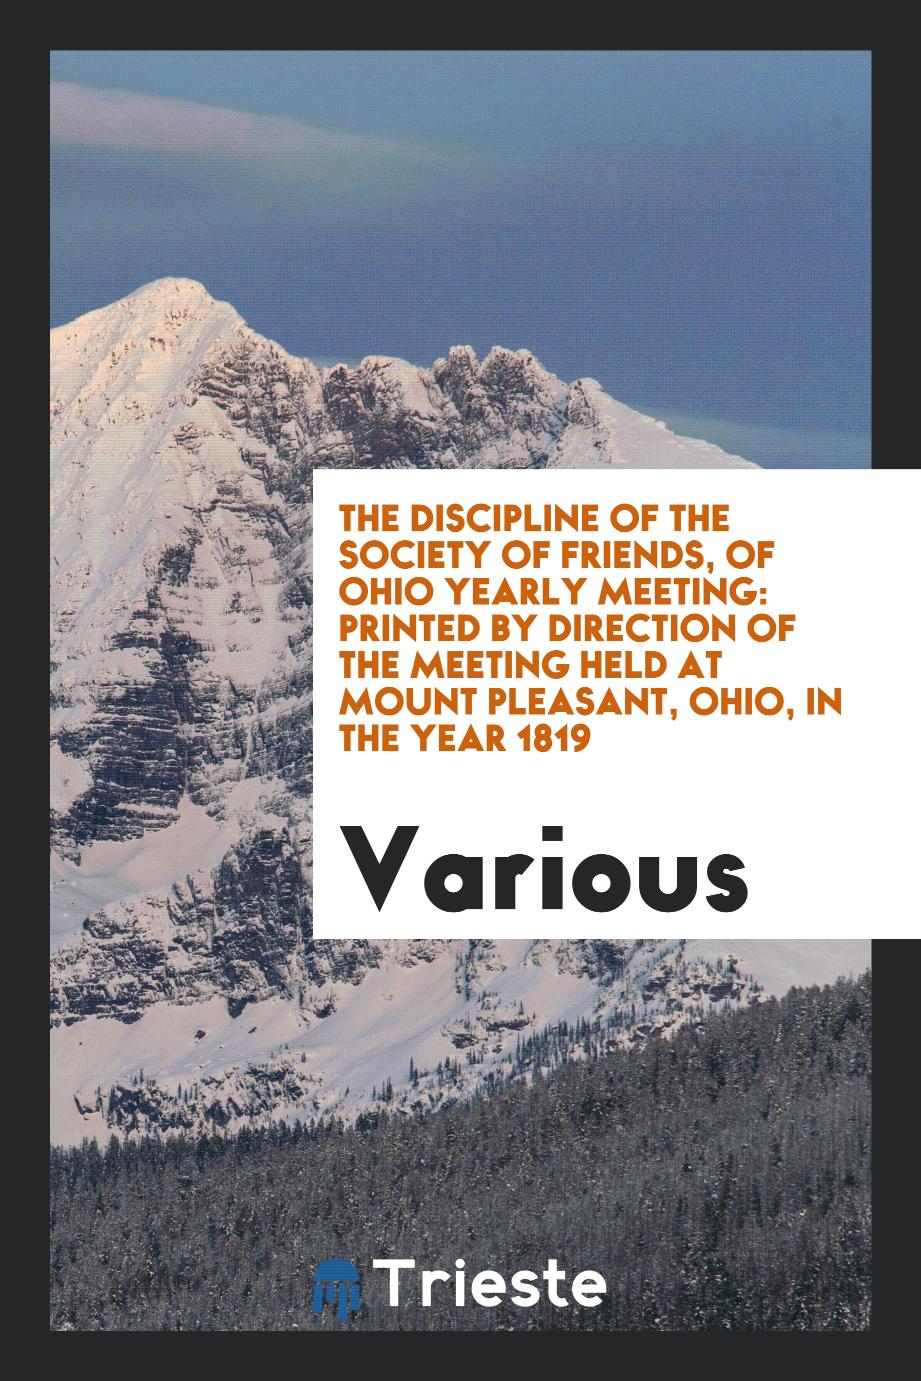 The Discipline of the Society of Friends, of Ohio Yearly Meeting: Printed by Direction of the Meeting Held at Mount Pleasant, Ohio, in the Year 1819